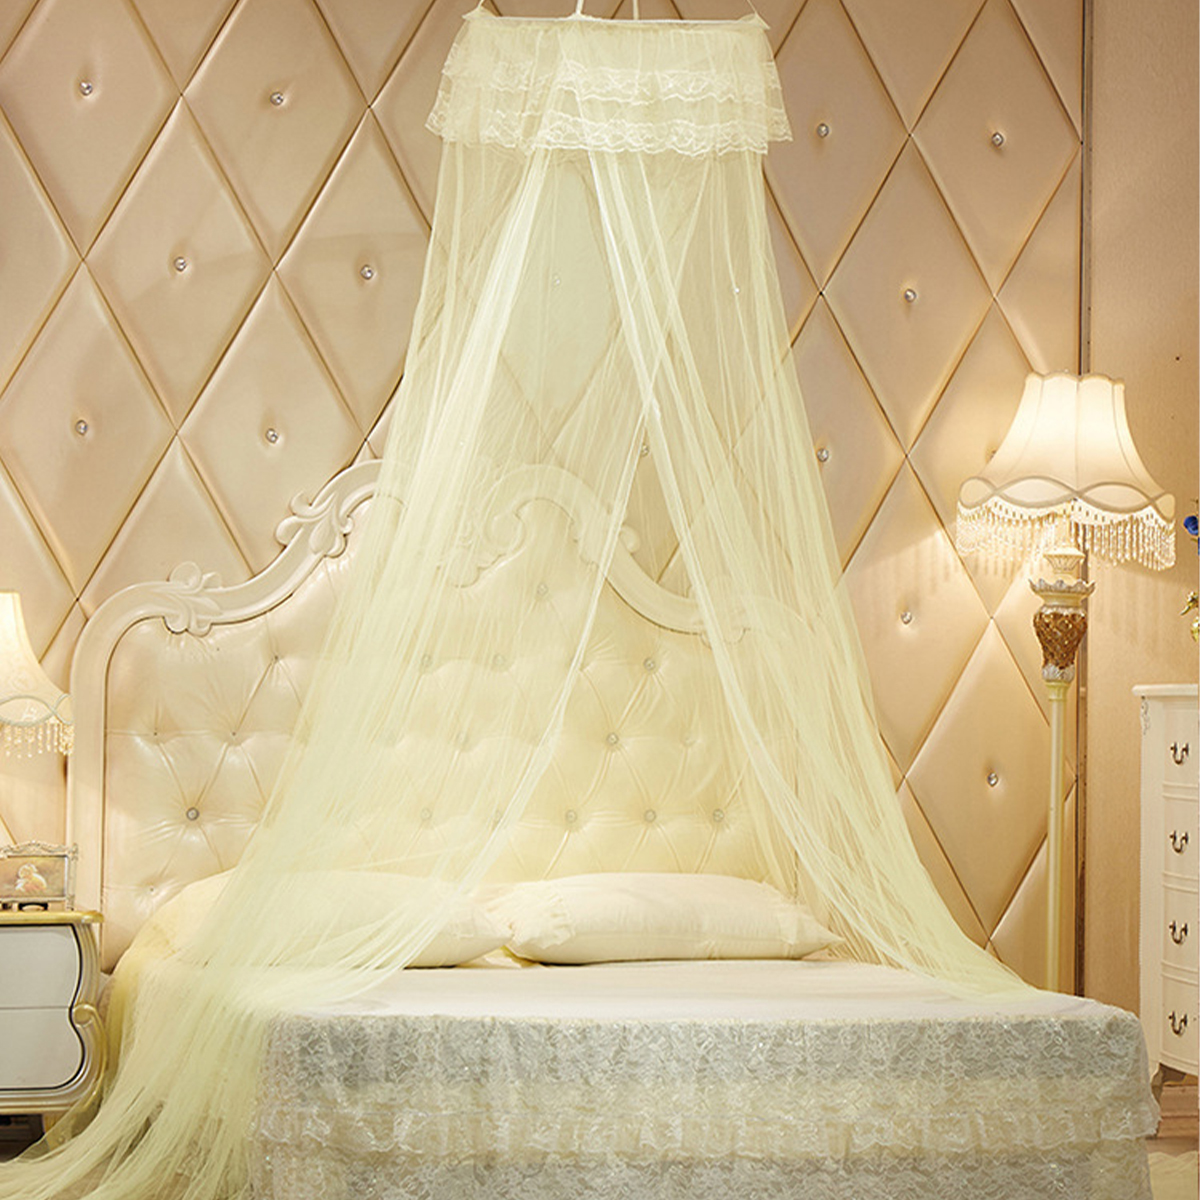 Anti-Mosquito-Round-Ceiling-Mosquito-Net-Dense-And-High-Polyester-Mesh-No-Installation-Mosquito-Net-1866033-4